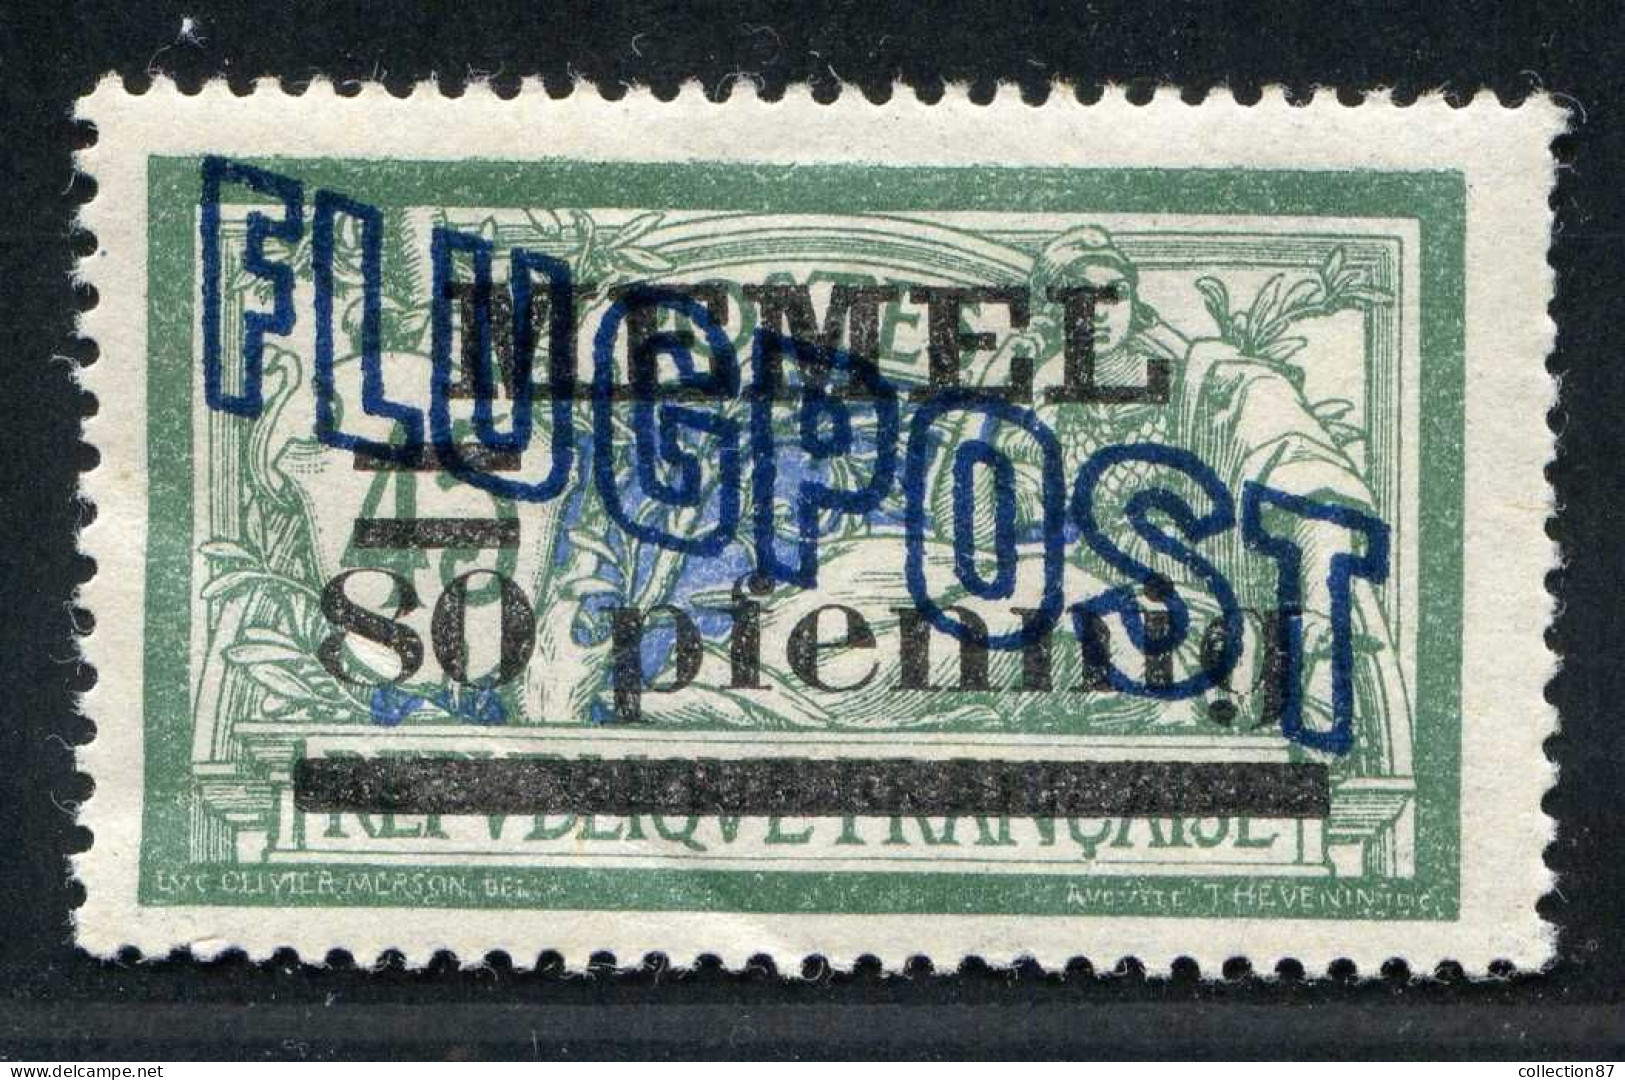 REF 088 > MEMEL FLUGPOST < PA N° 3 * Neuf Ch Dos Visible - MH * > Air Mail - Aéro - Nuovi